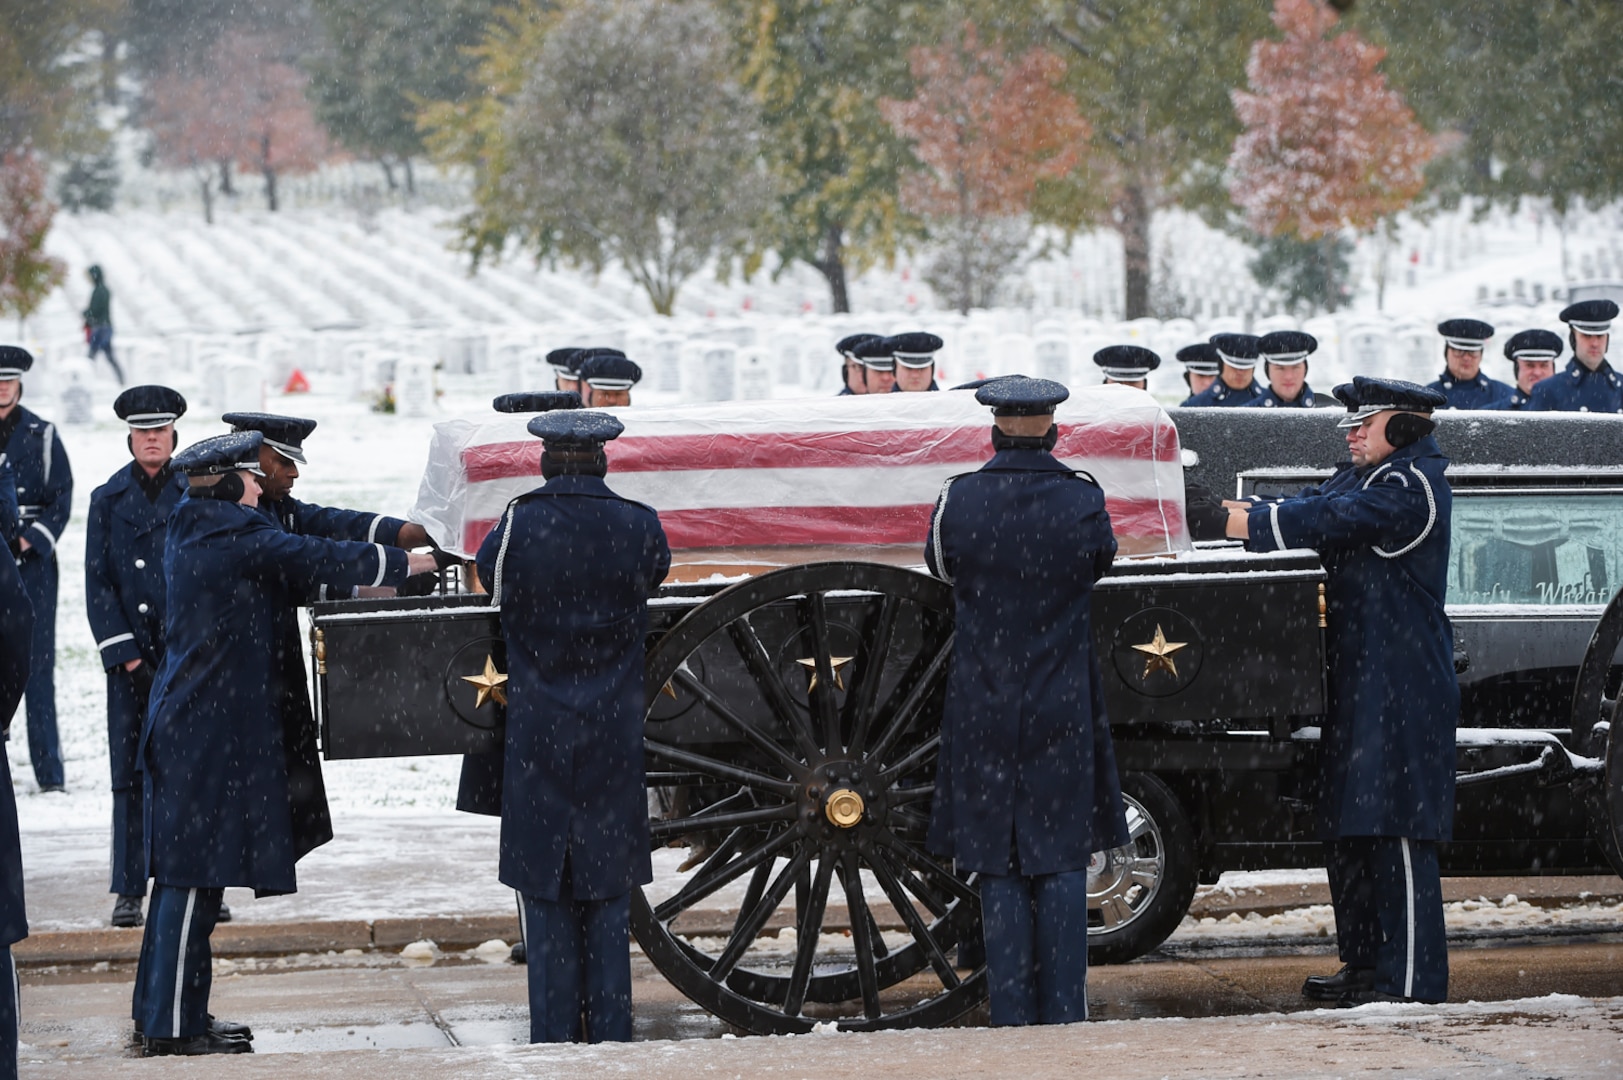 Members of the U.S. Air Force casket team prepares to lift the casket of the late Chief Master Sgt. Therese Henrion during a burial ceremony at Arlington National Cemetery, Nov. 15, 2018.